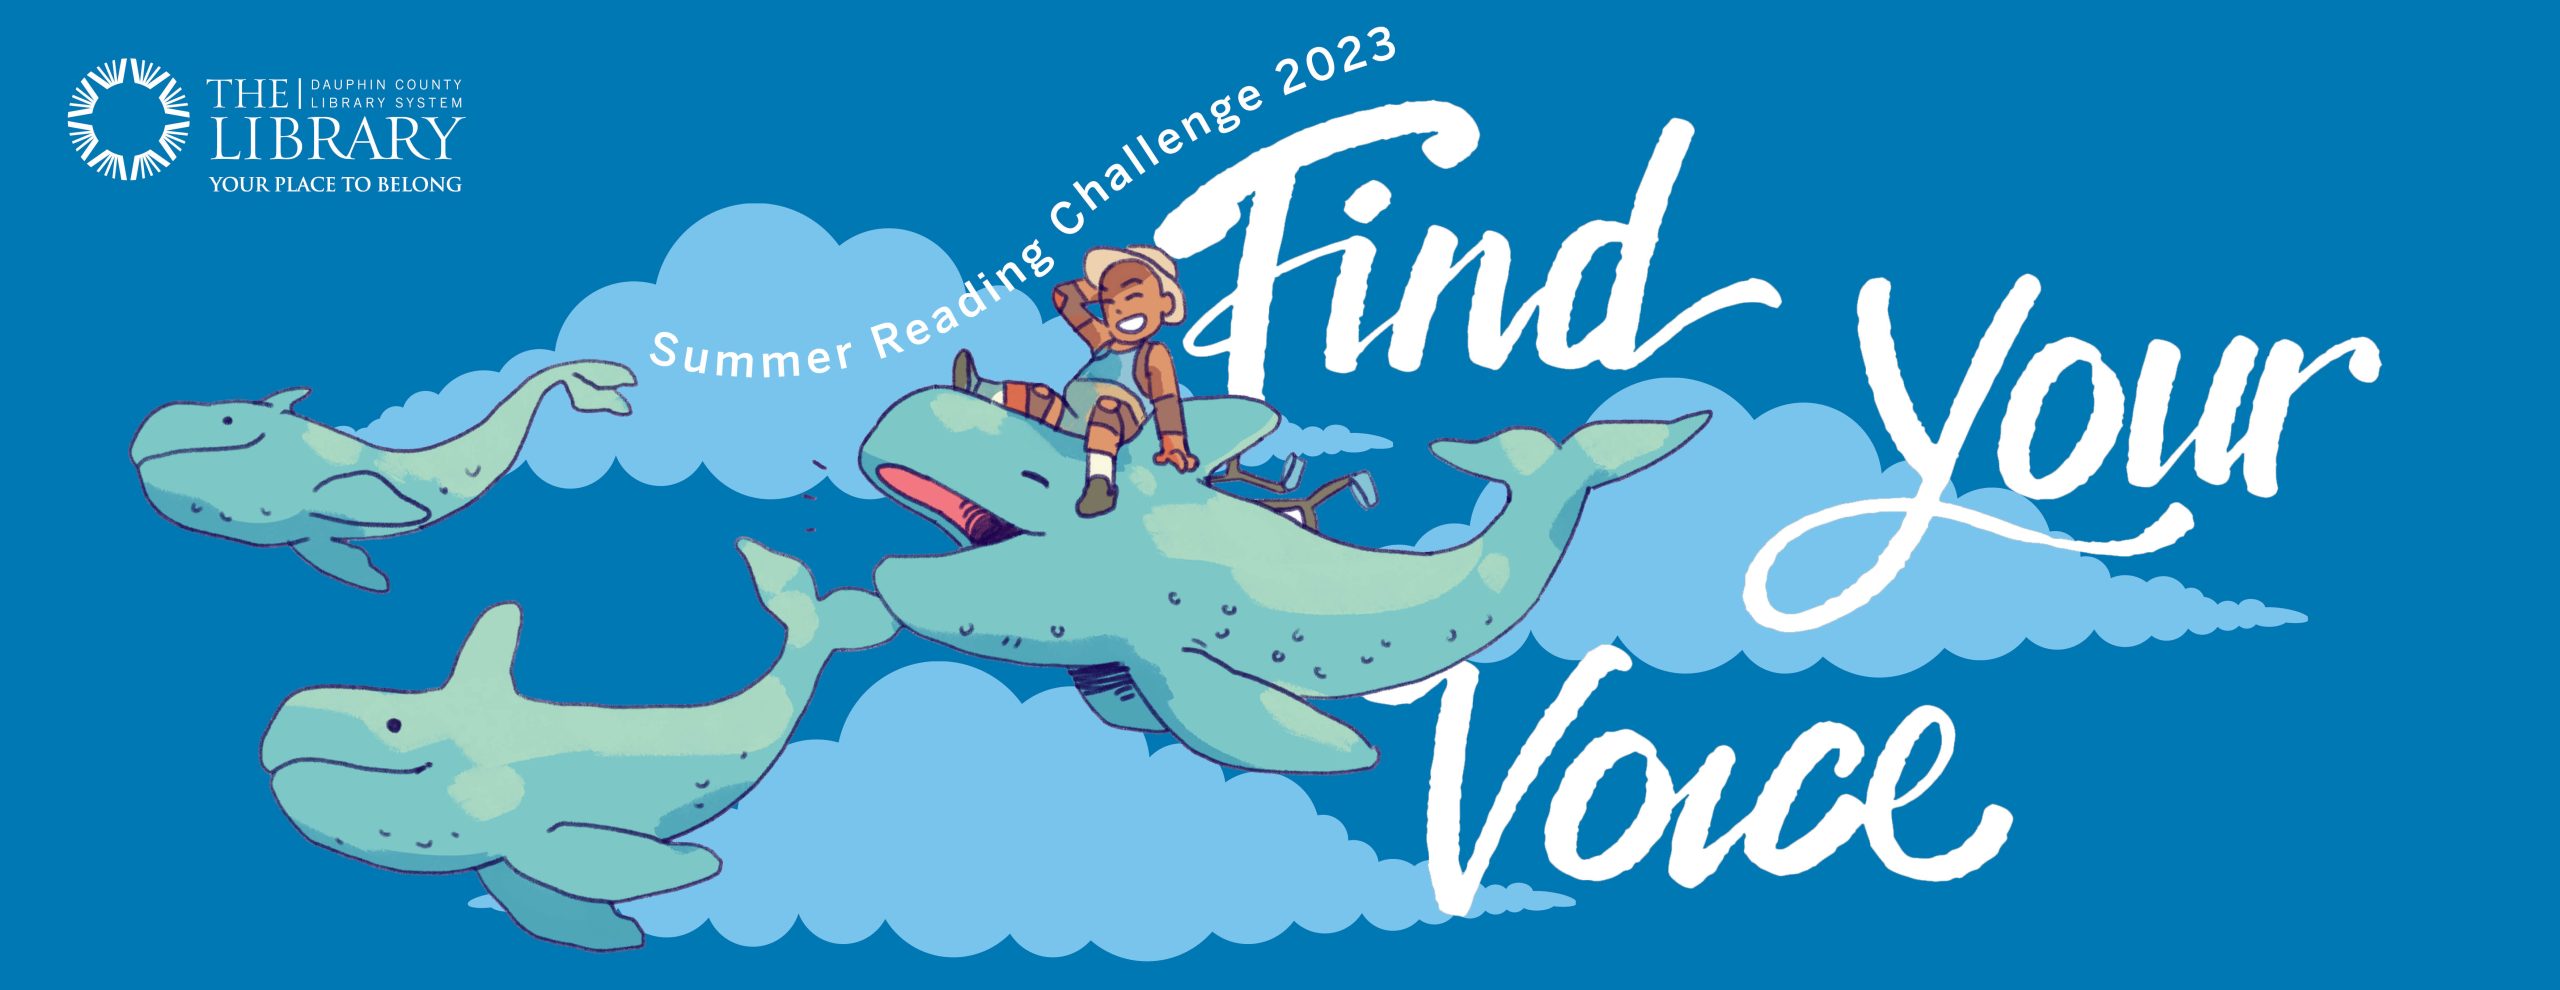 Summer Reading Club 2023 | Find Your Voice